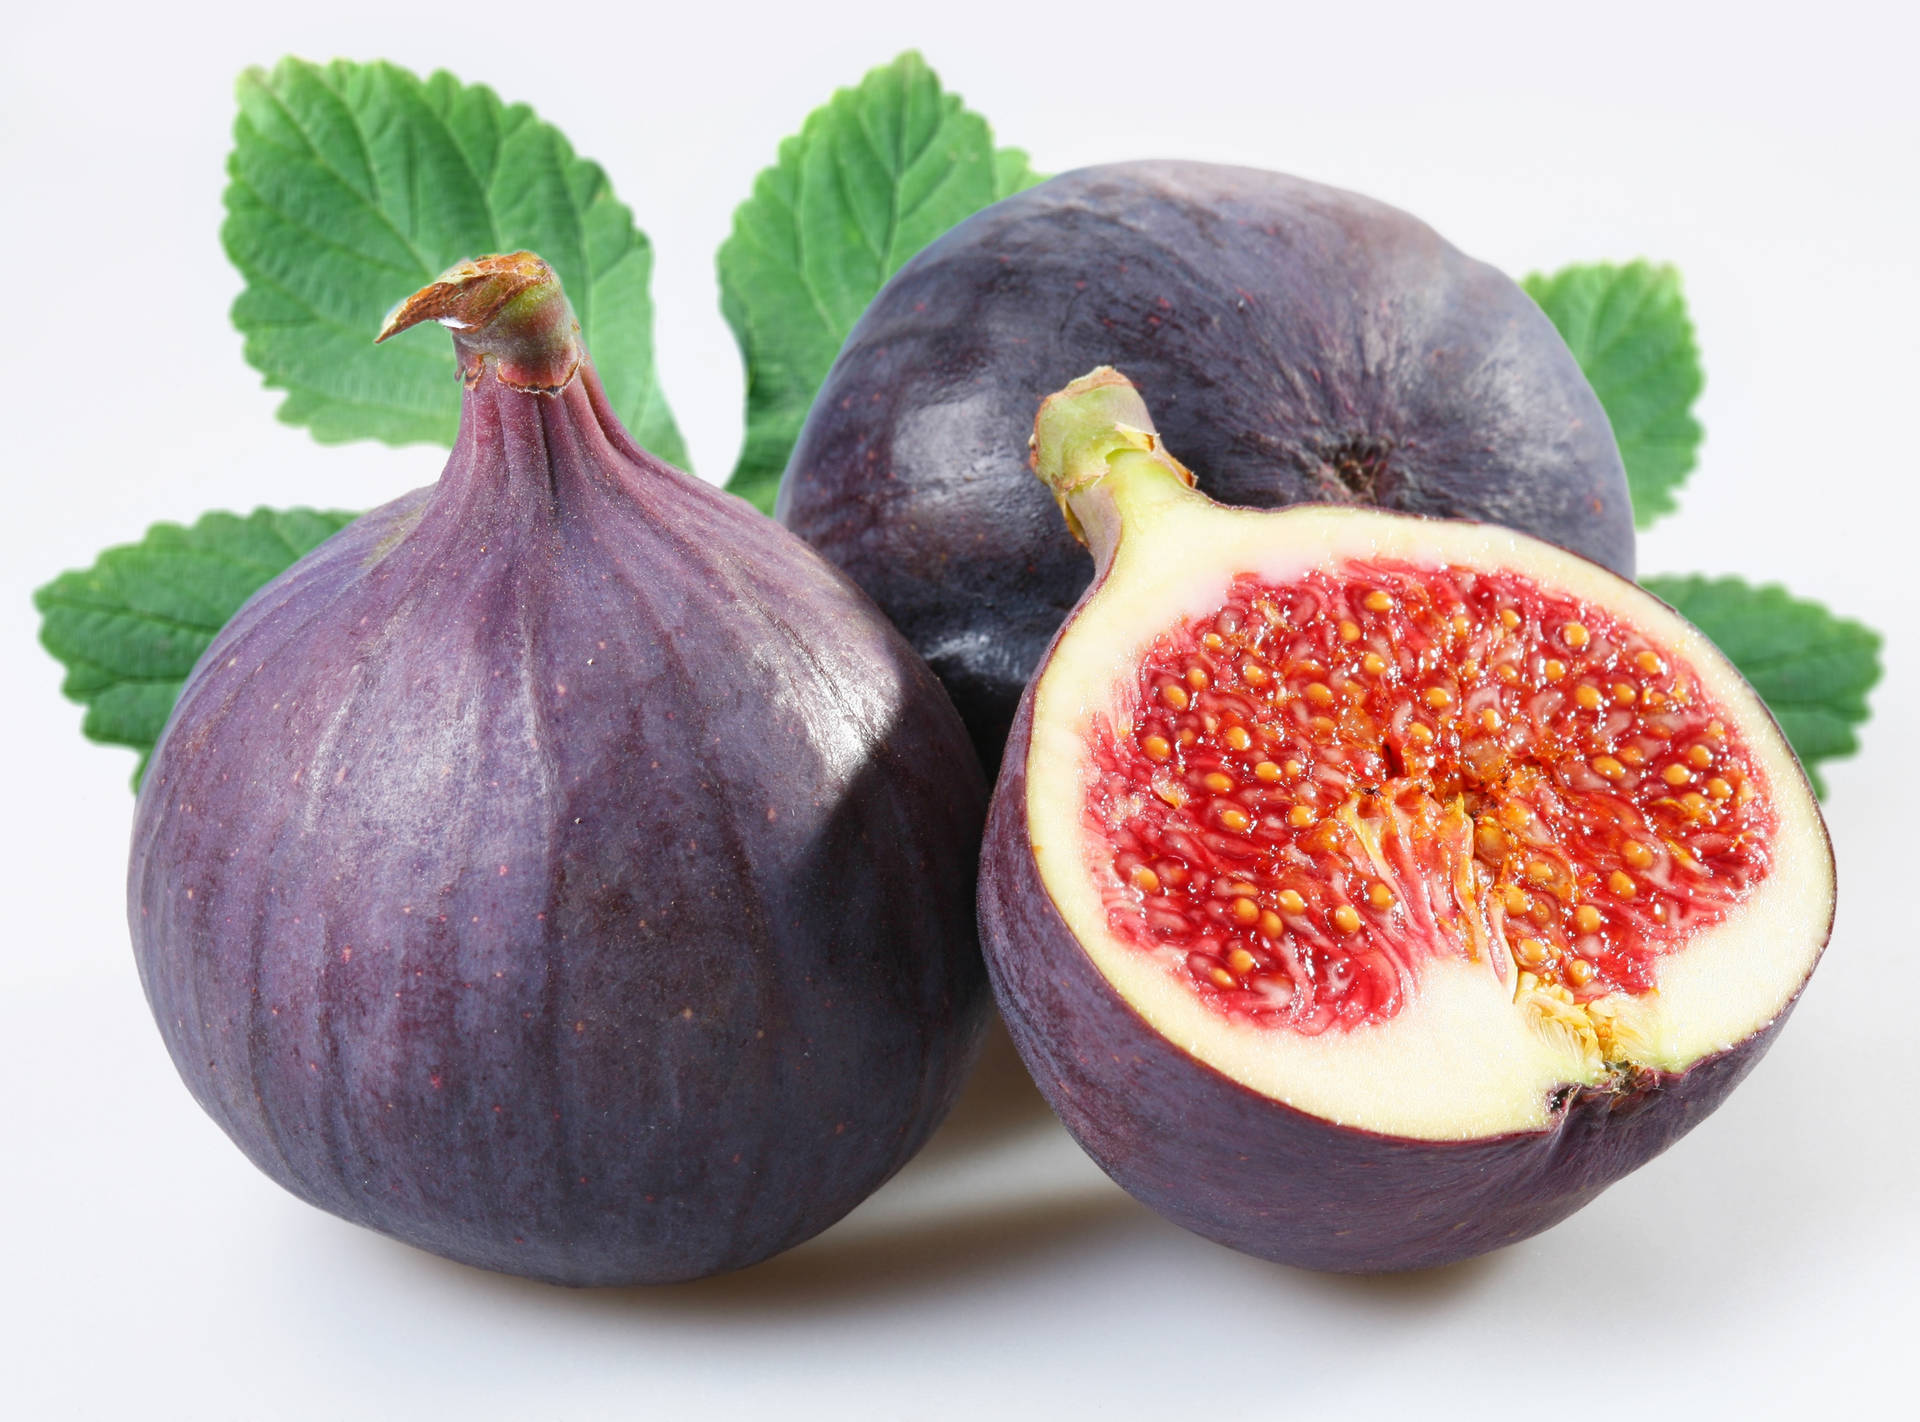 Pulpyquality Figs In Context Of Computer Or Mobile Wallpaper Would Be Translated As 